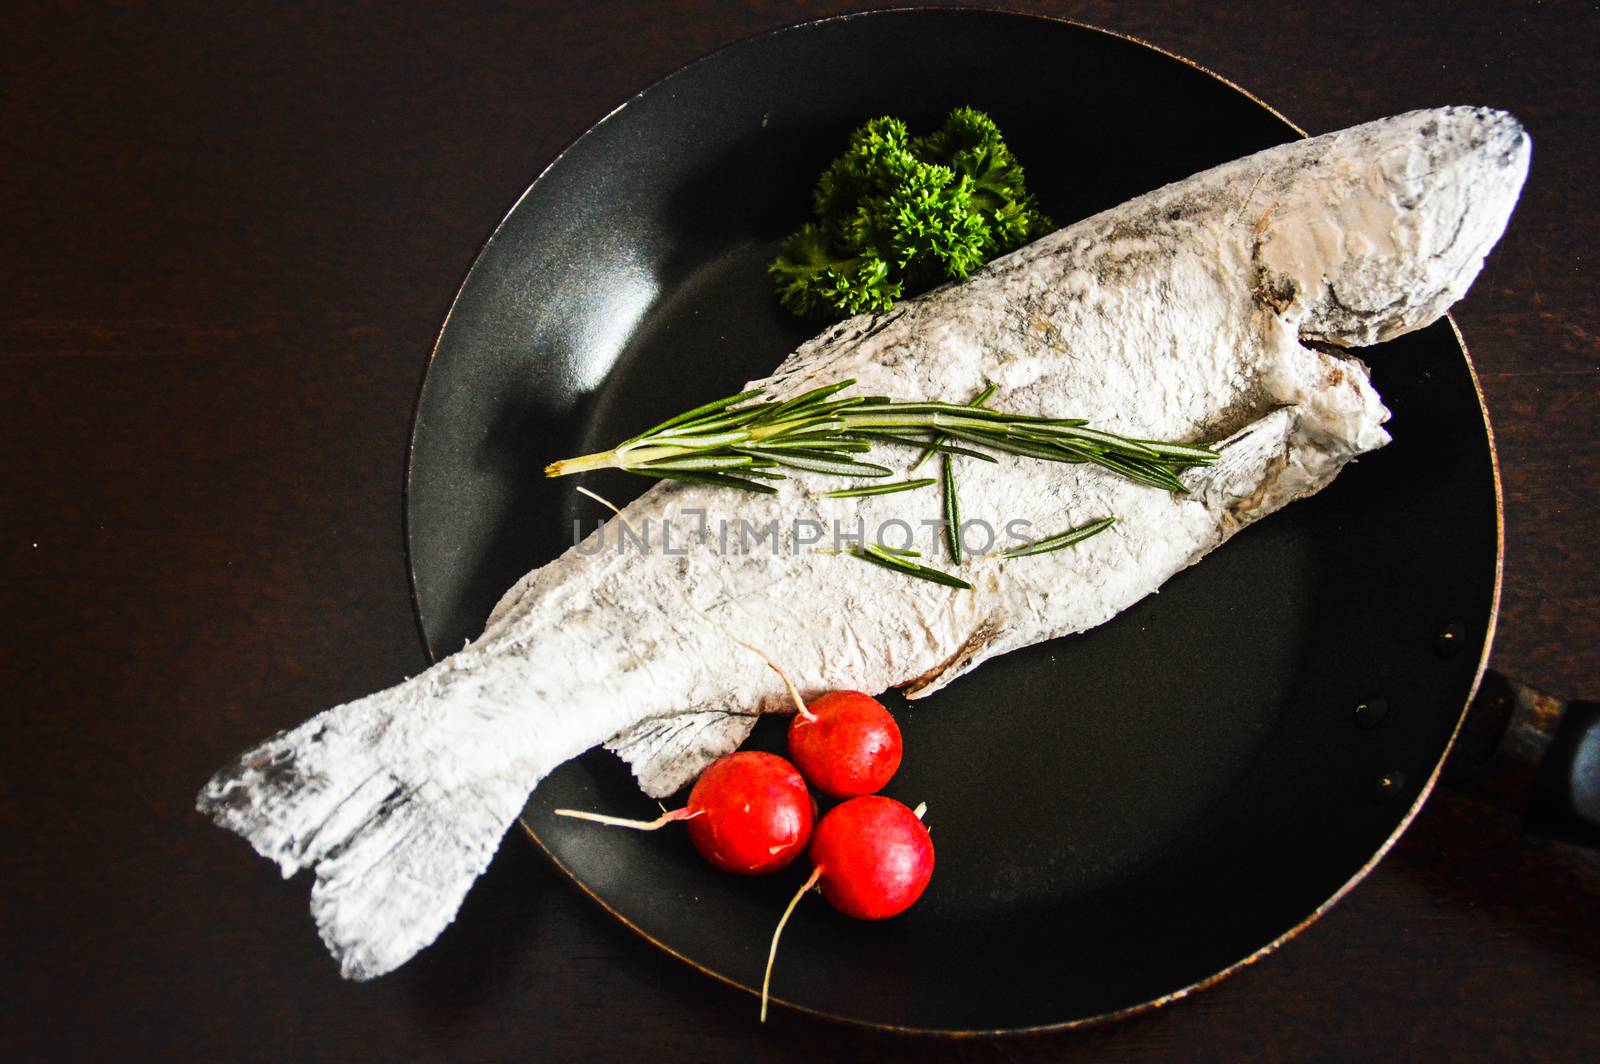 Top view of a trout fish covered in flour topped with rosemary and parsley in an iron skillet by Sonnet15